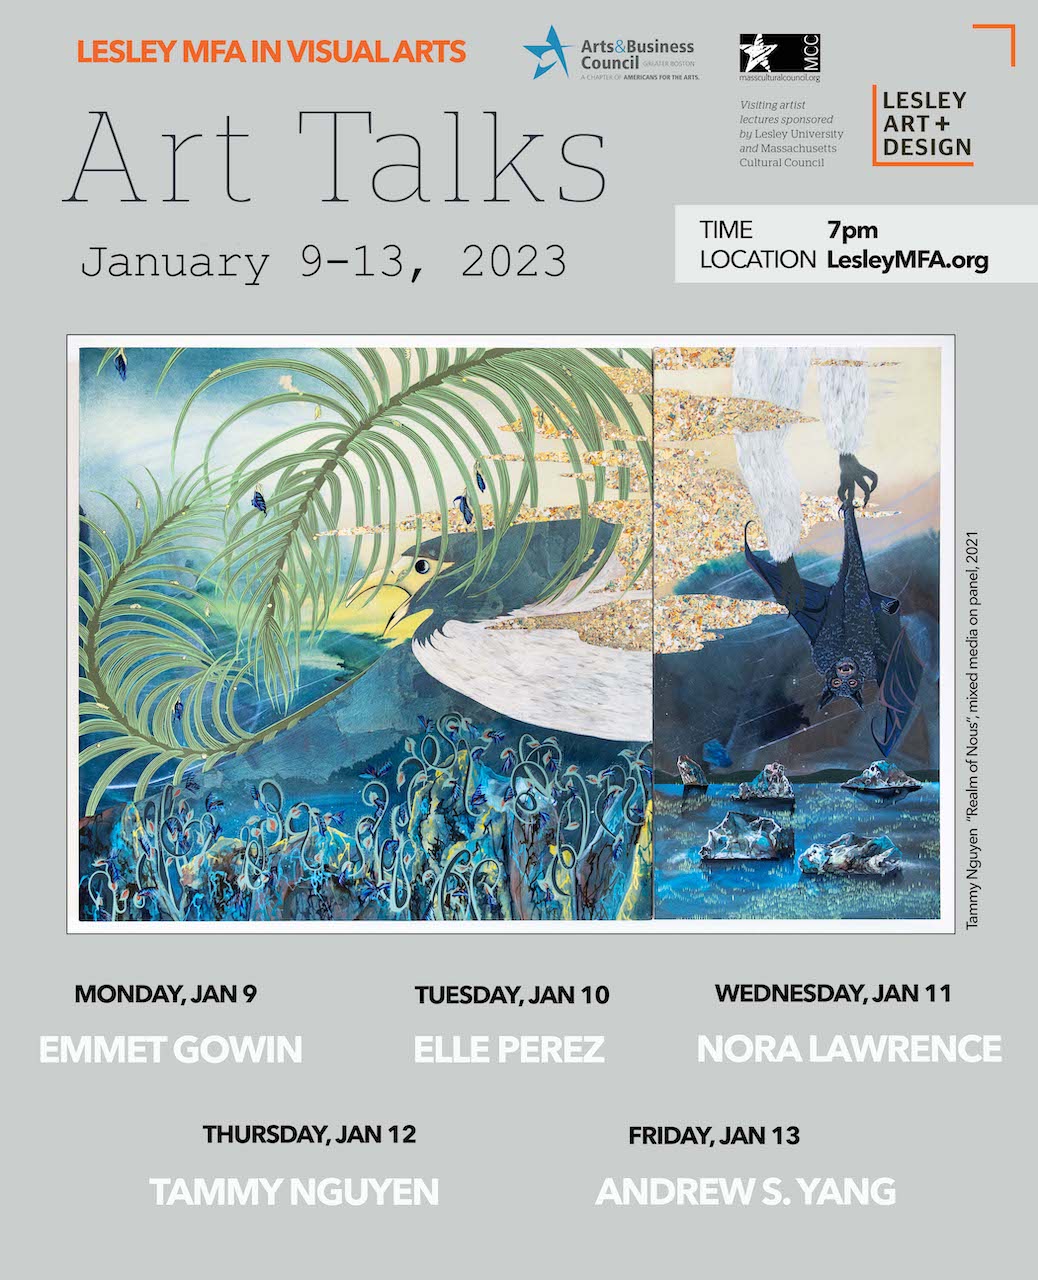 A poster for the Art Talks Series with a gray background and a piece of art with a bird and plants.